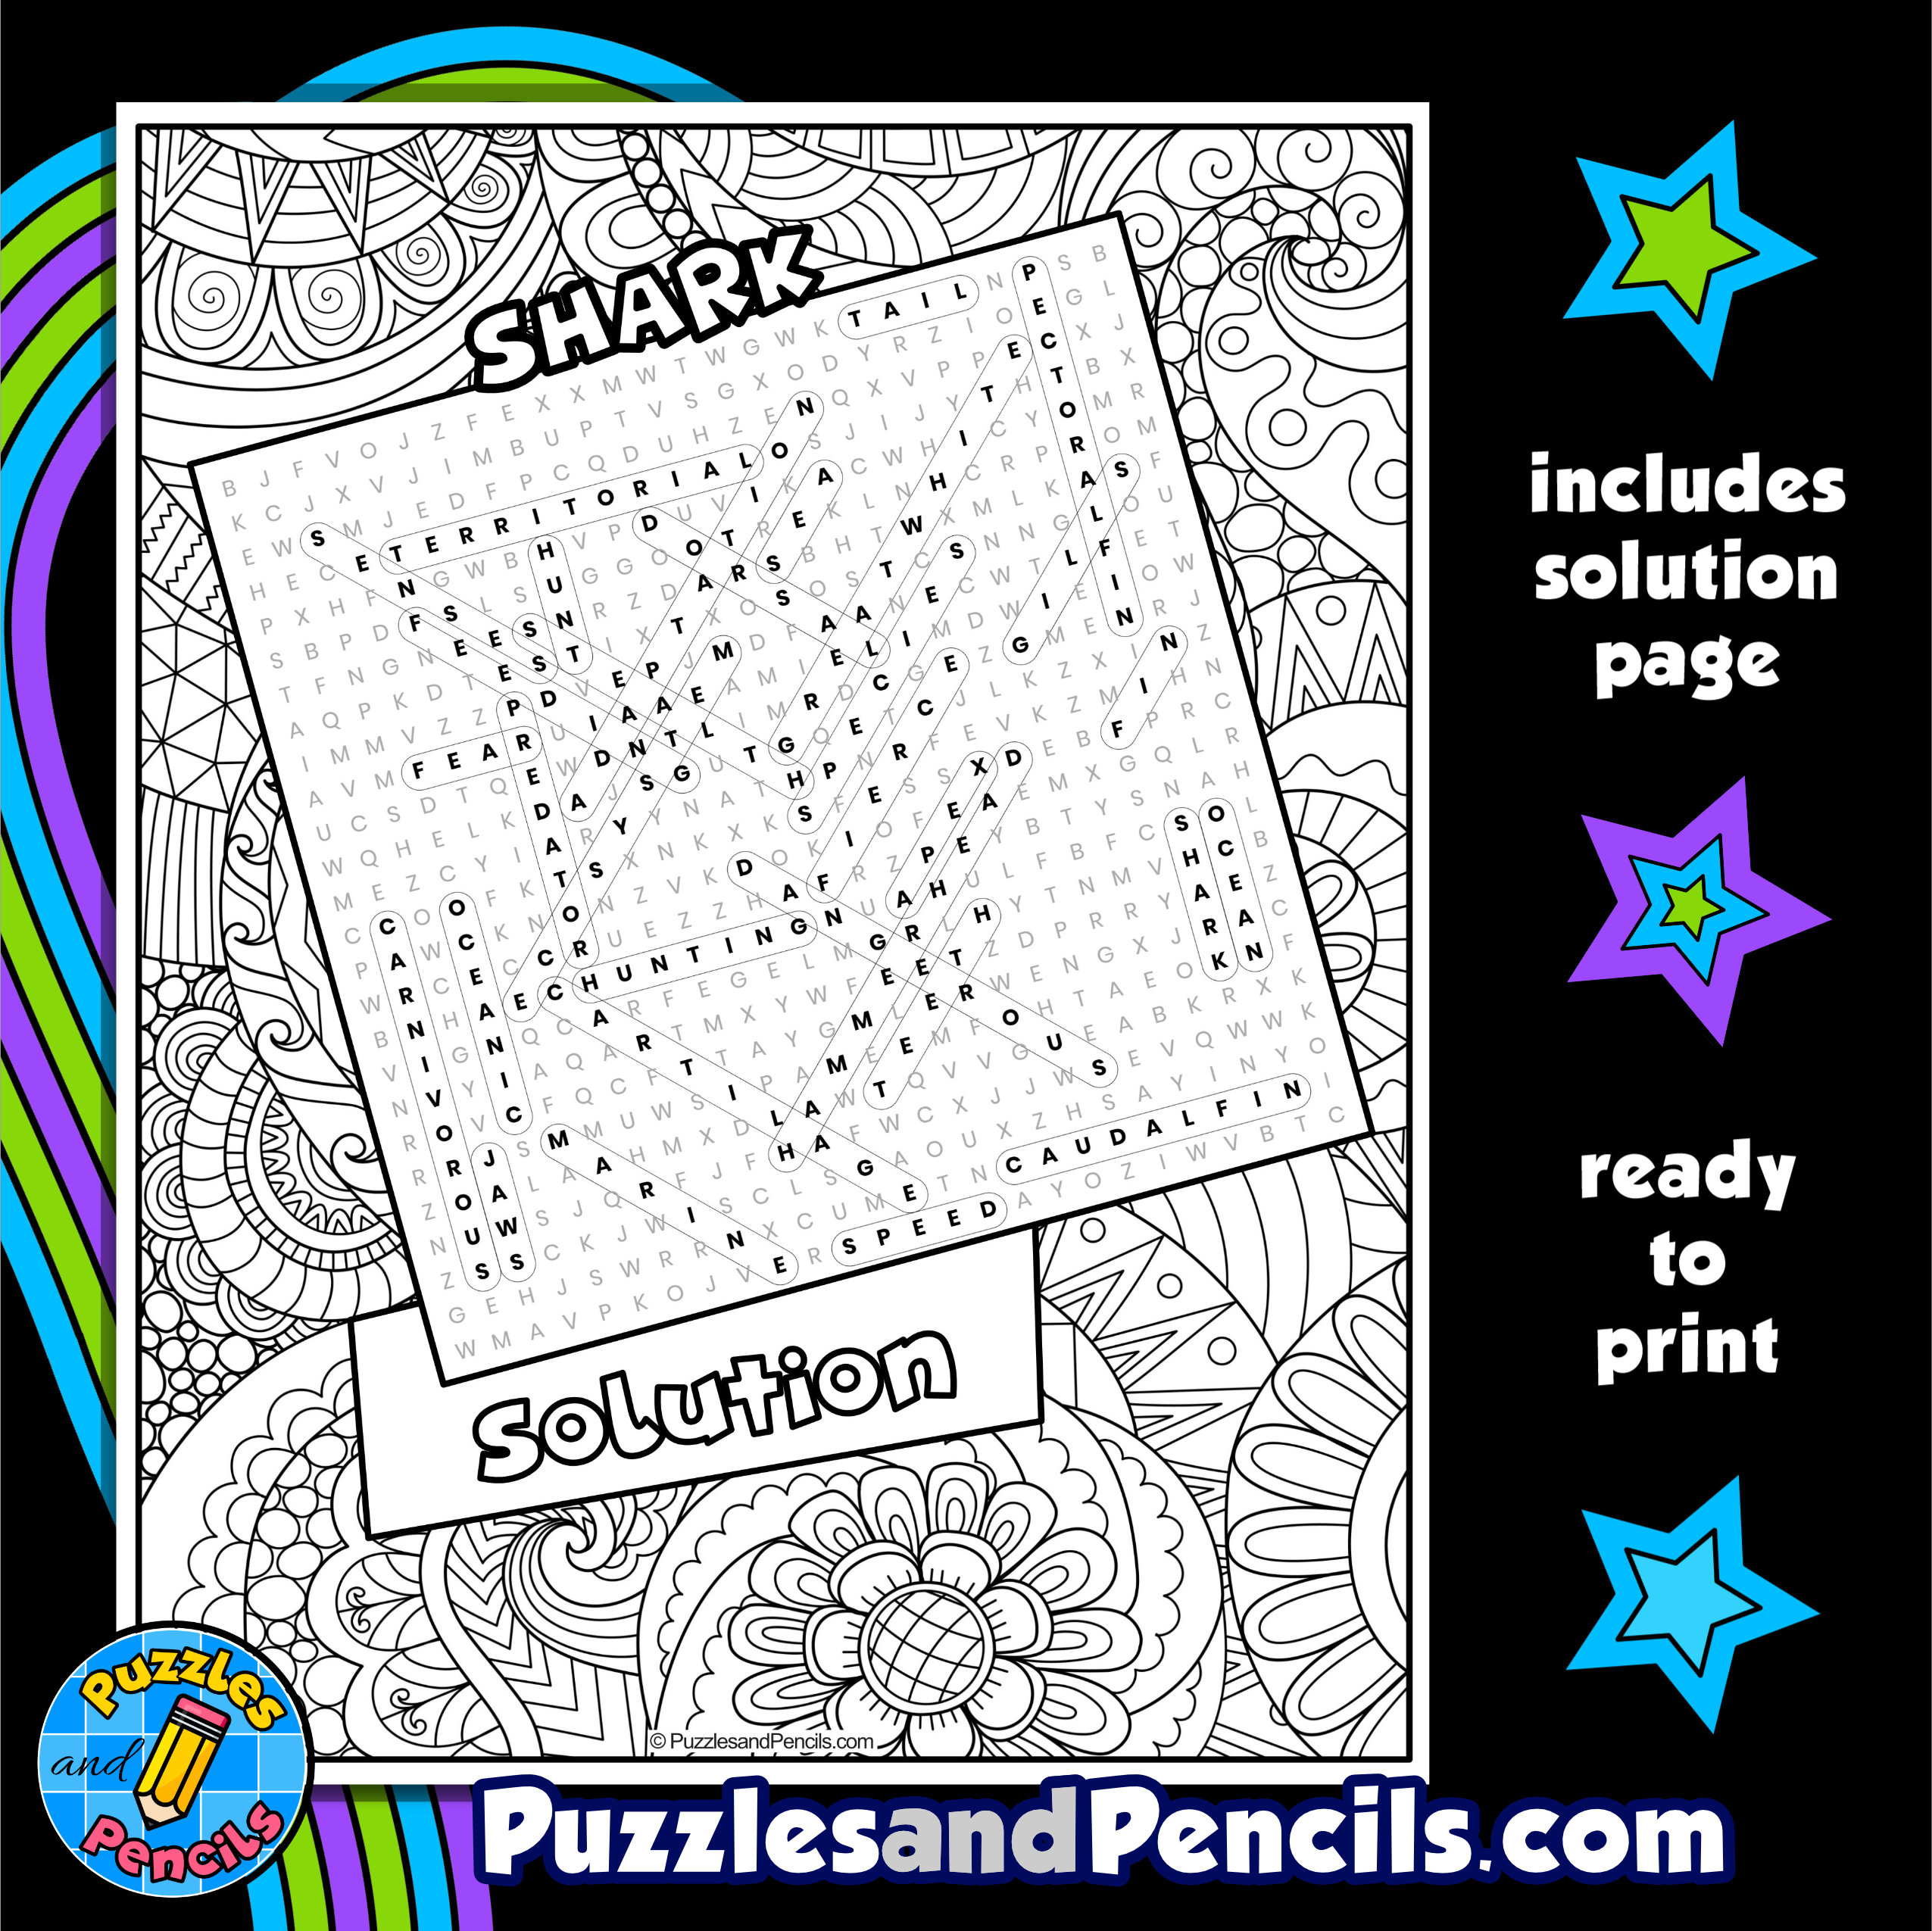 Shark word search puzzle activity with coloring wordsearch made by teachers